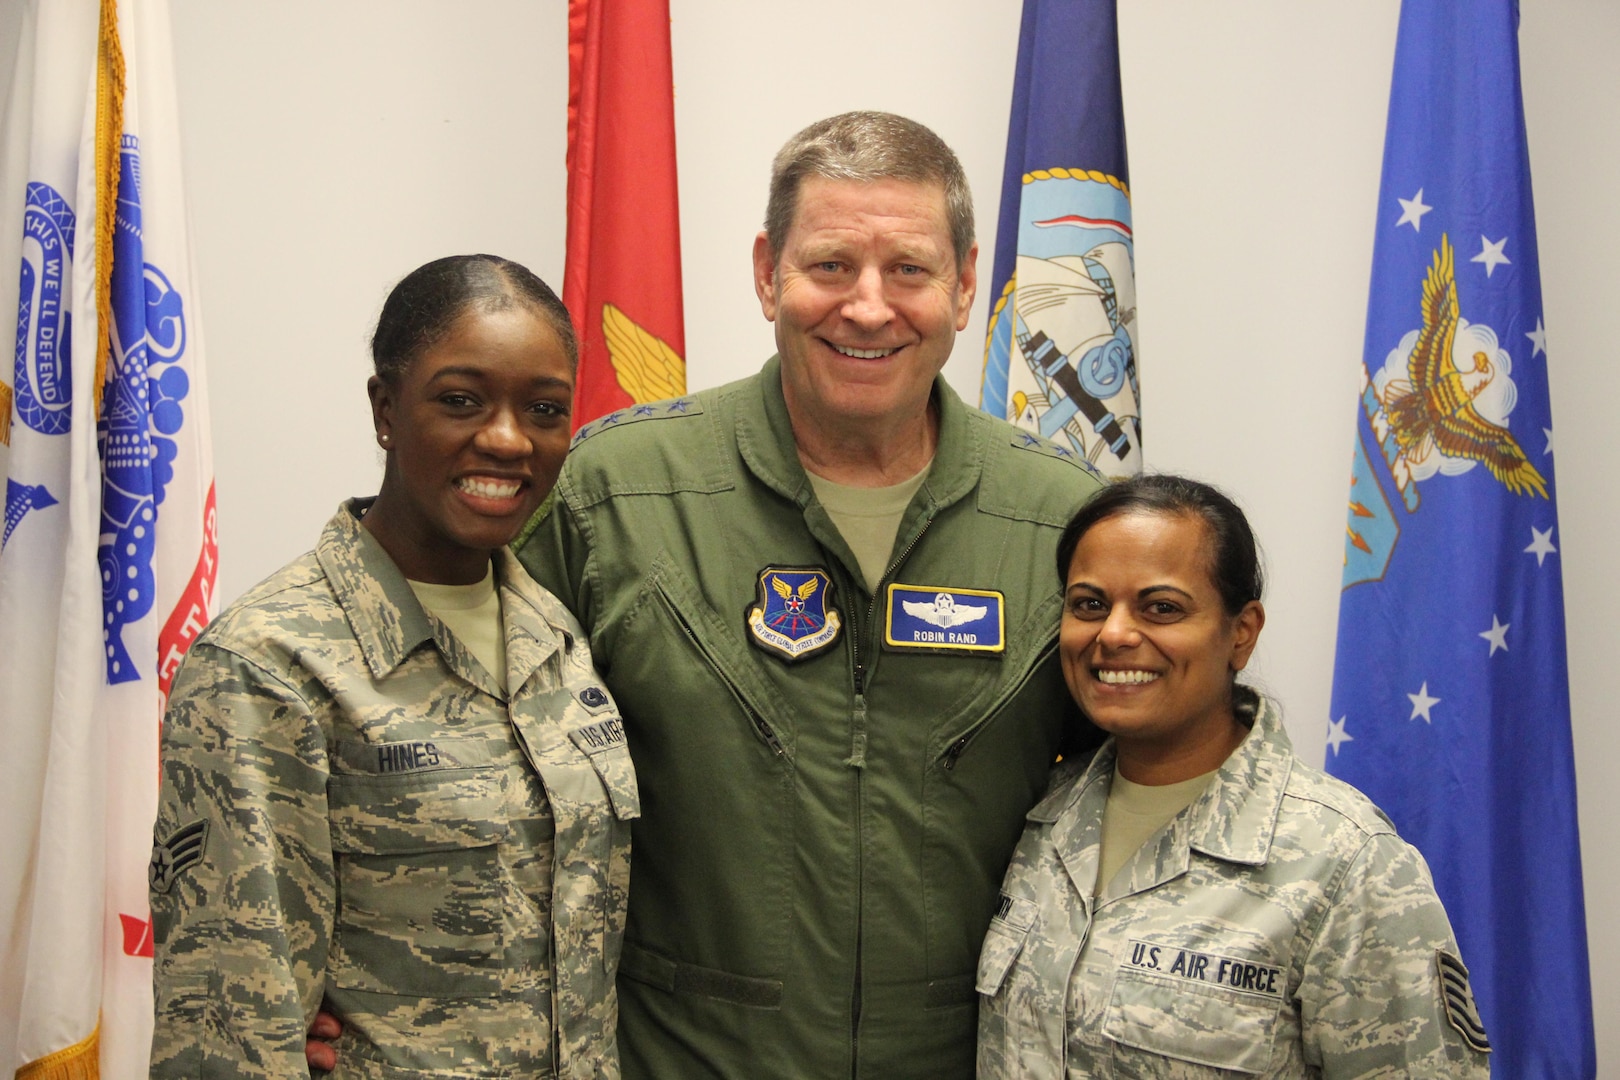 Gen. Rand poses for a photo with two NSWC Crane employees, SrA Cherelle Hines (left) and TSgt Anjuli Smith (right), following his all-hands presentation.